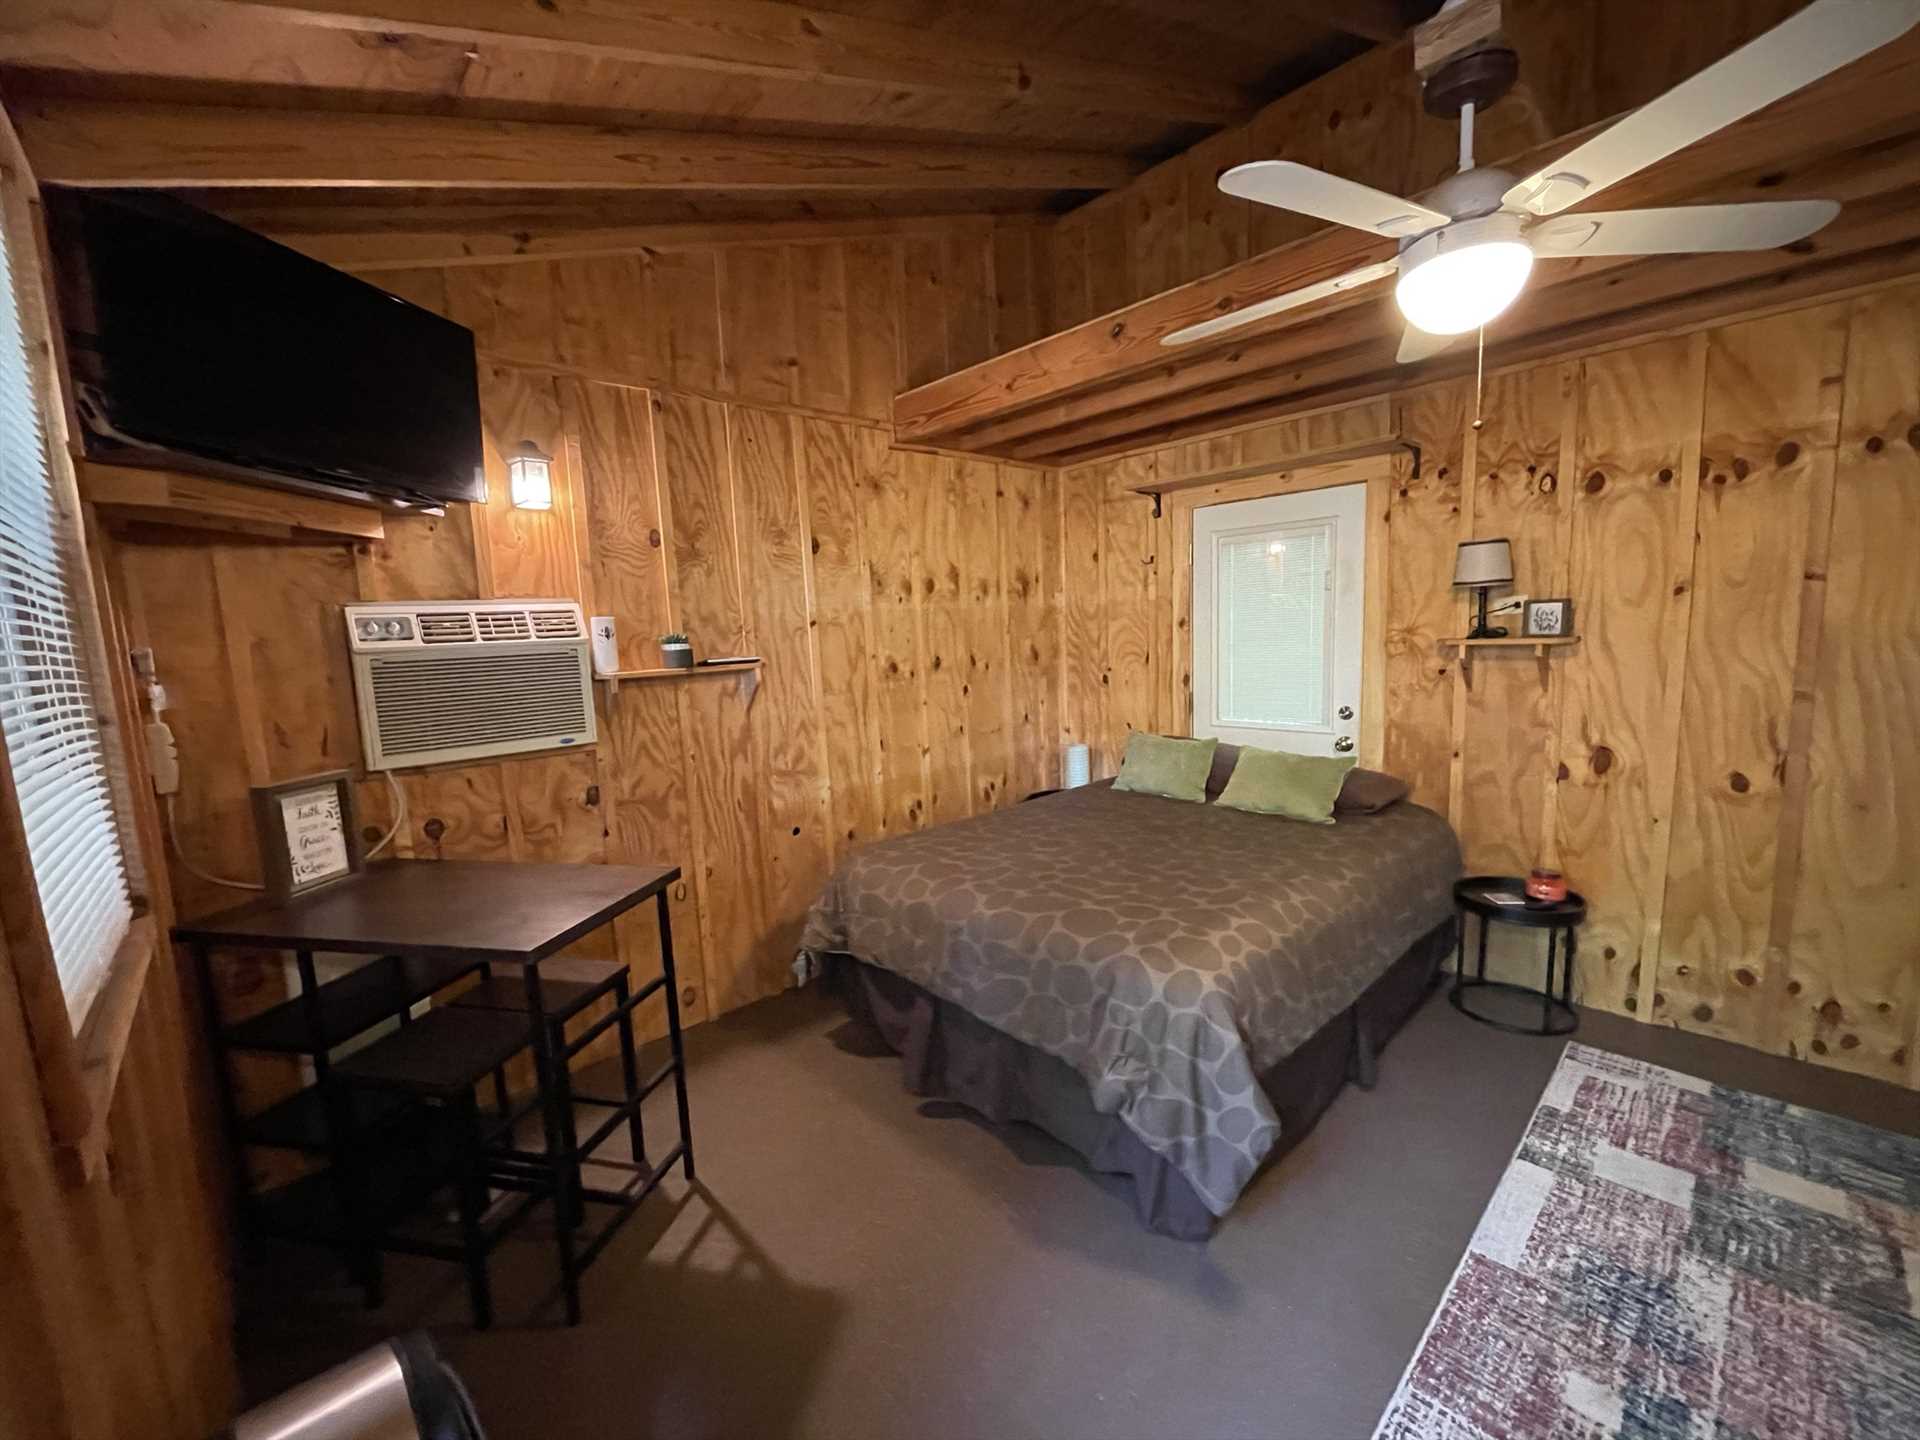                                                 Climate control, TV with Roku, and Wifi Internet round out the tech extras you'll enjoy in this cozy Hill Country cabin!